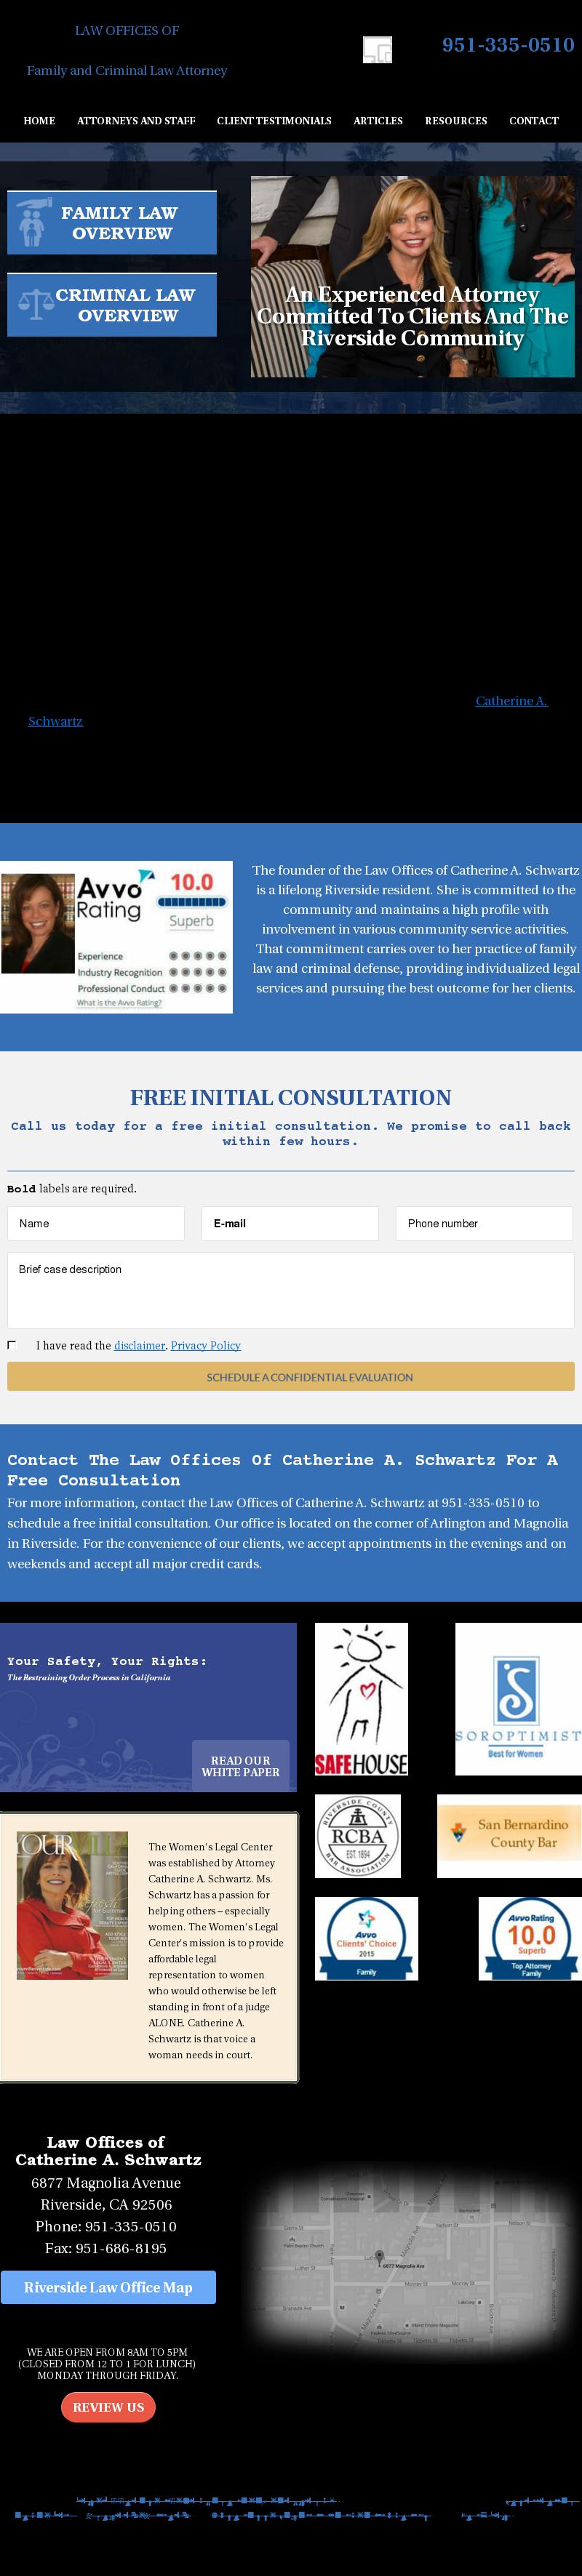 Law Offices of Catherine A. Schwartz - Riverside CA Lawyers